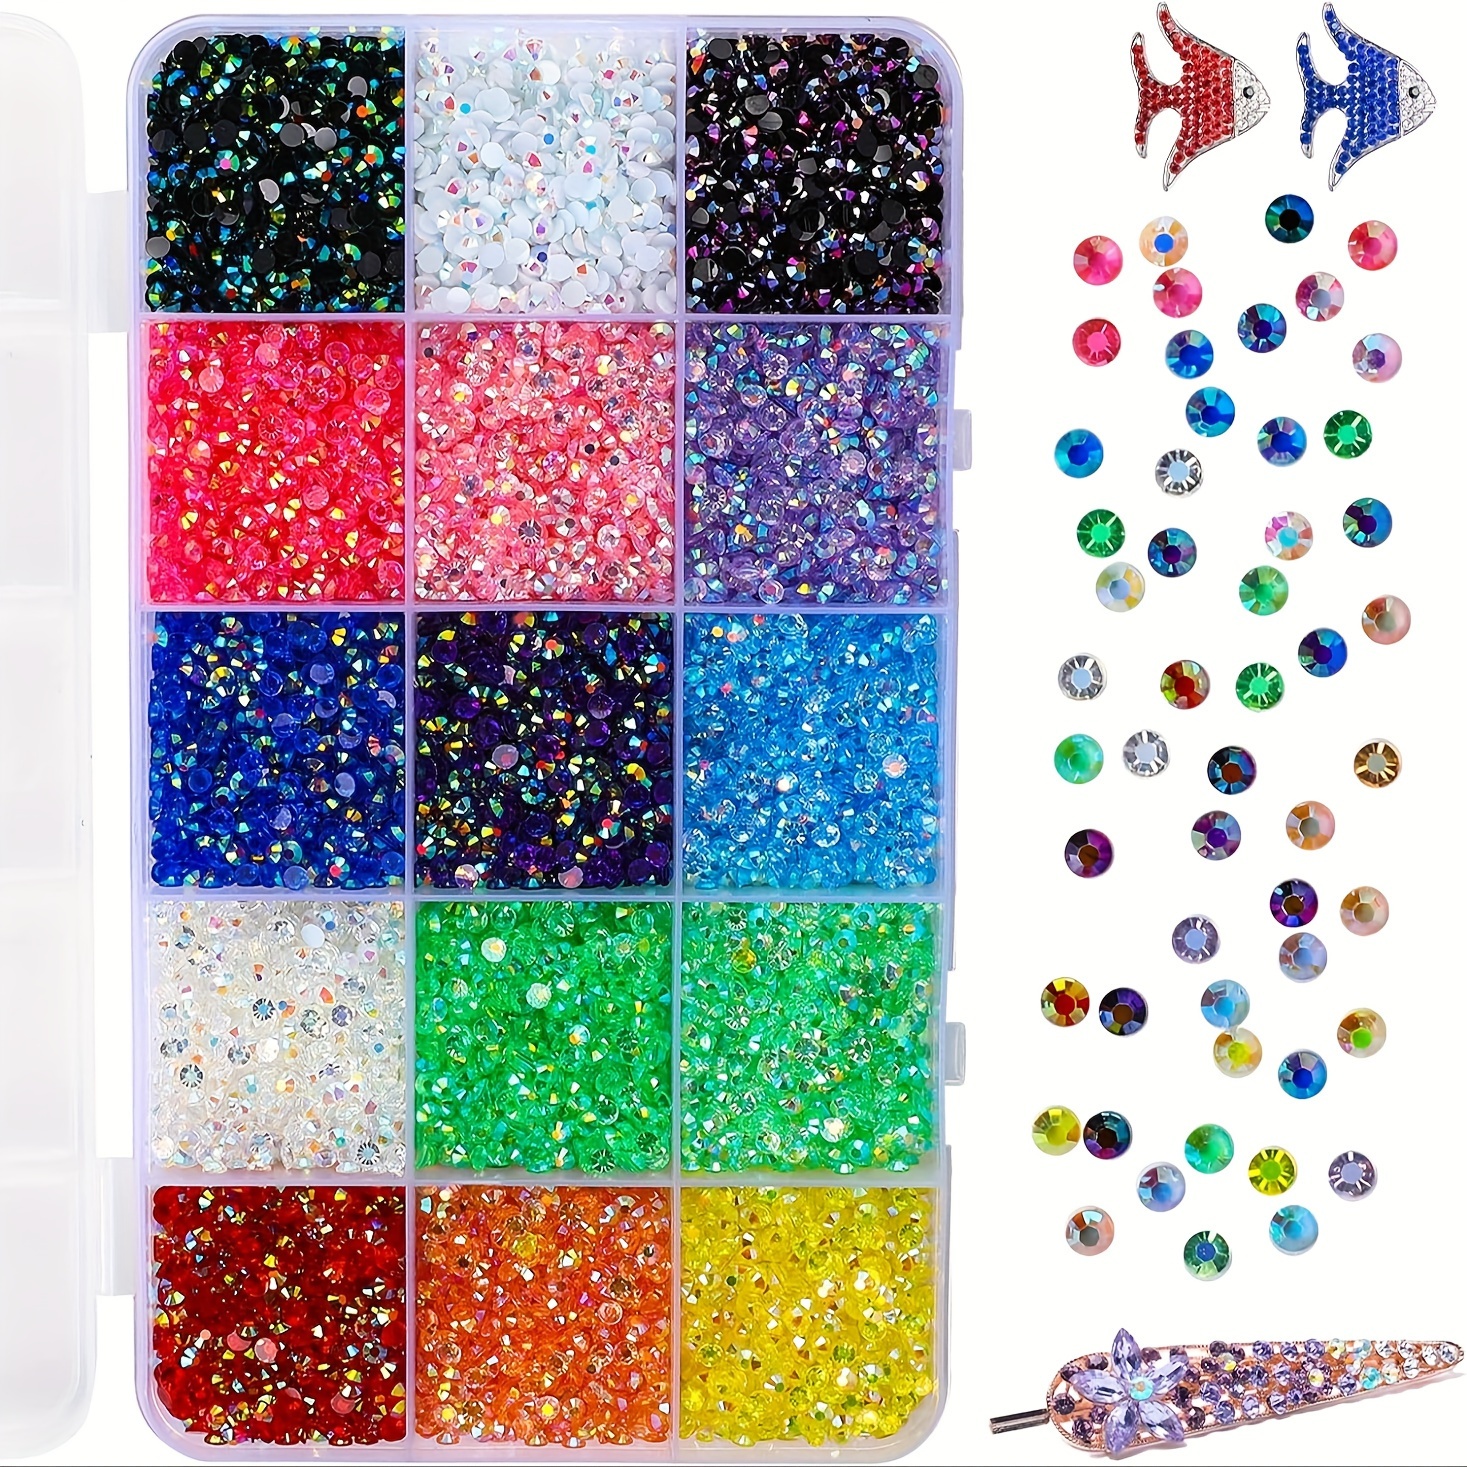 

11000pcs Resin Rhinestones, 3mm Jelly Color Gems, Rainbow Nail Art Decorations, Multi-color Gemstones For Diy Makeup And Nail Artistry (15 Assorted Colors)